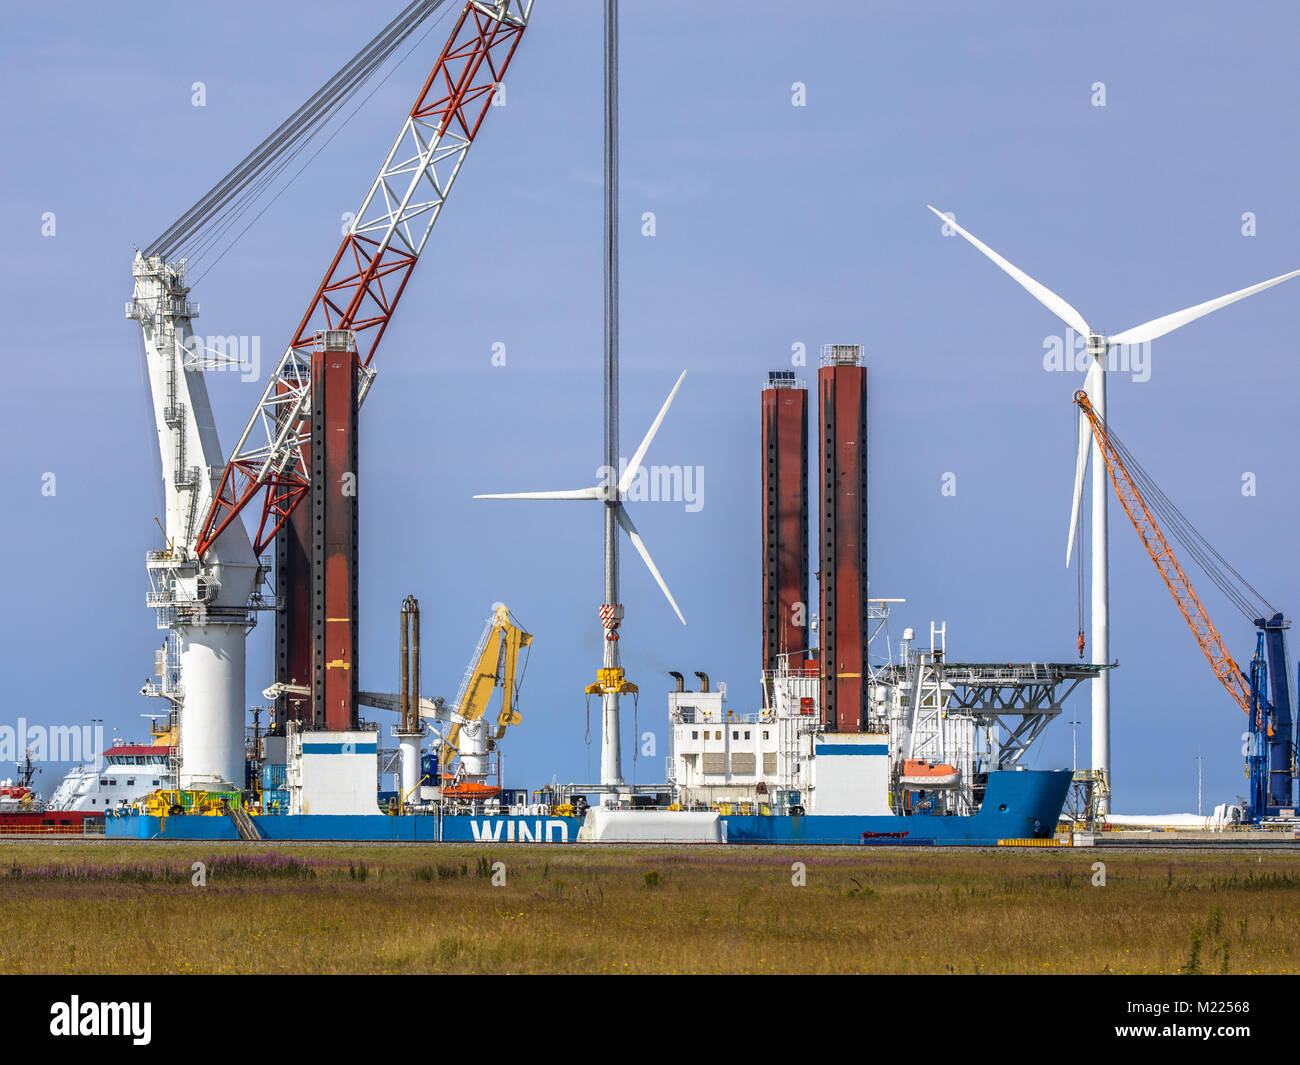 Offshore wind turbine supply vessel anchored and loading in port of Eemshaven, Netherlands Stock Photo